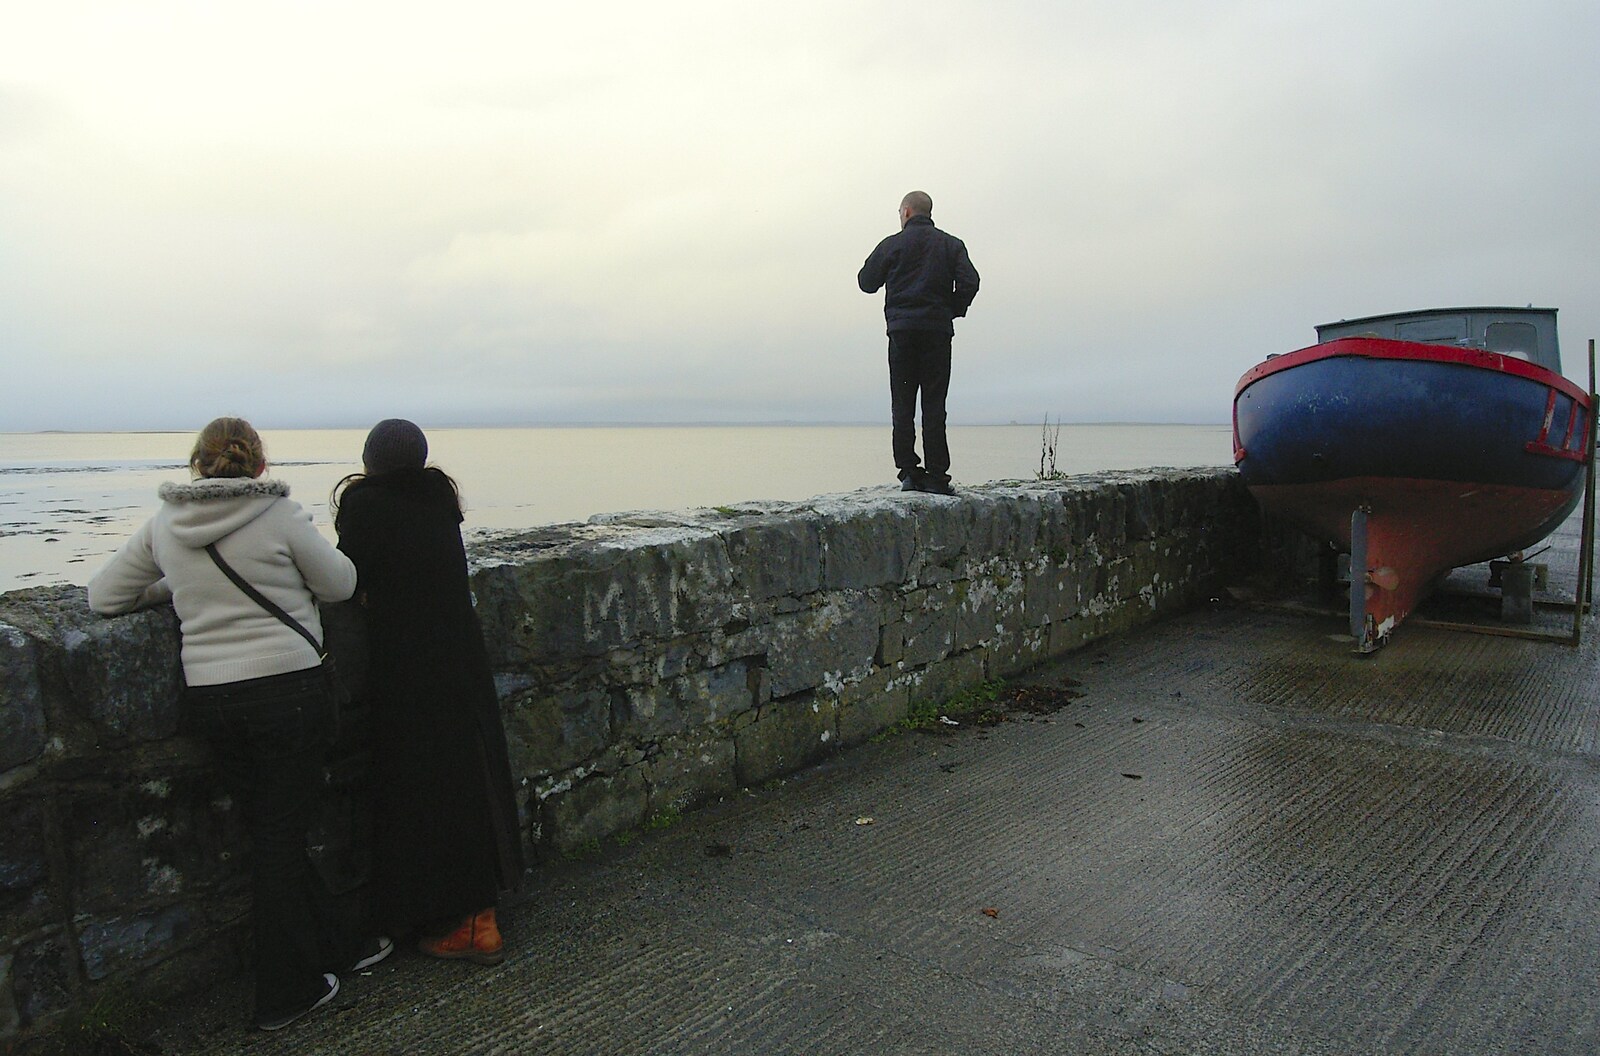 Gary stands on the sea wall from Corofin, Ennistymon and The Burran, County Clare, Western Ireland - 27th October 2006